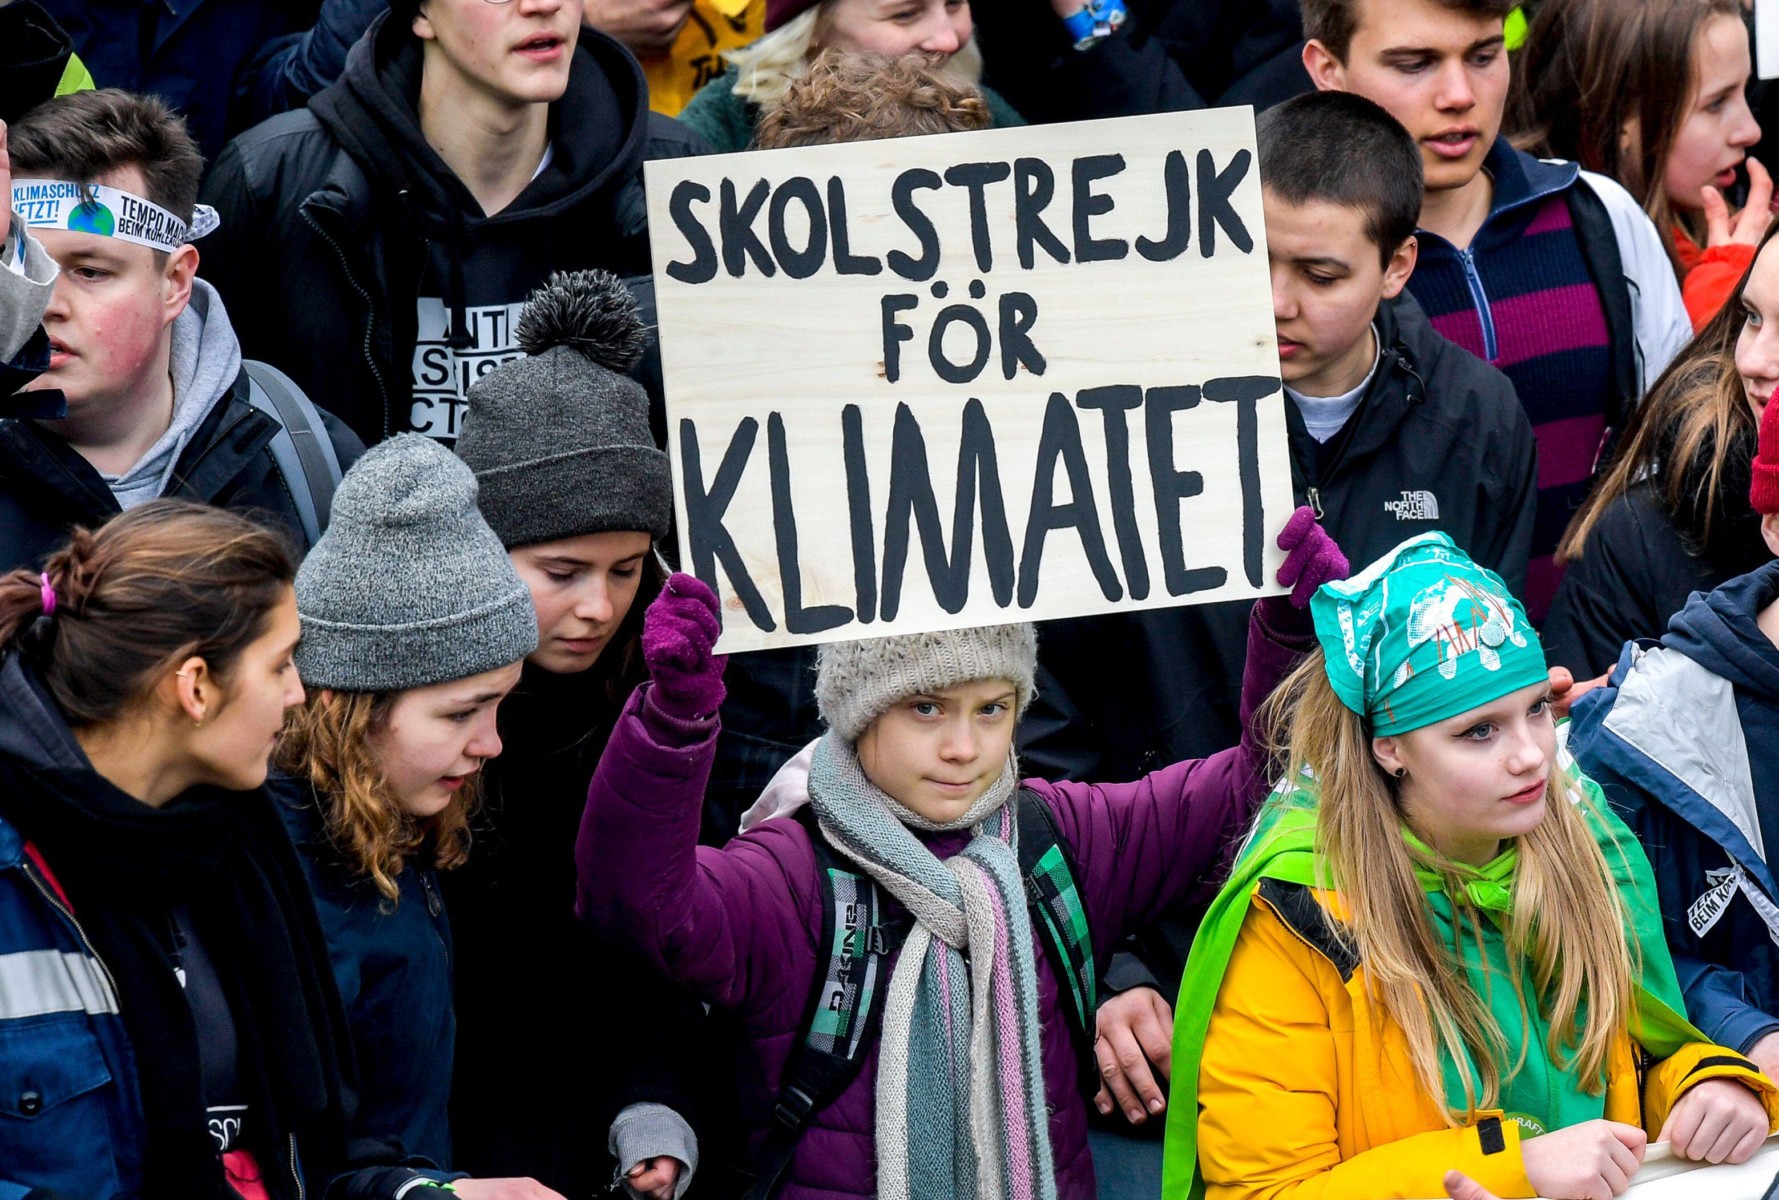 Greta Thunberg has been leading the charge against climate change